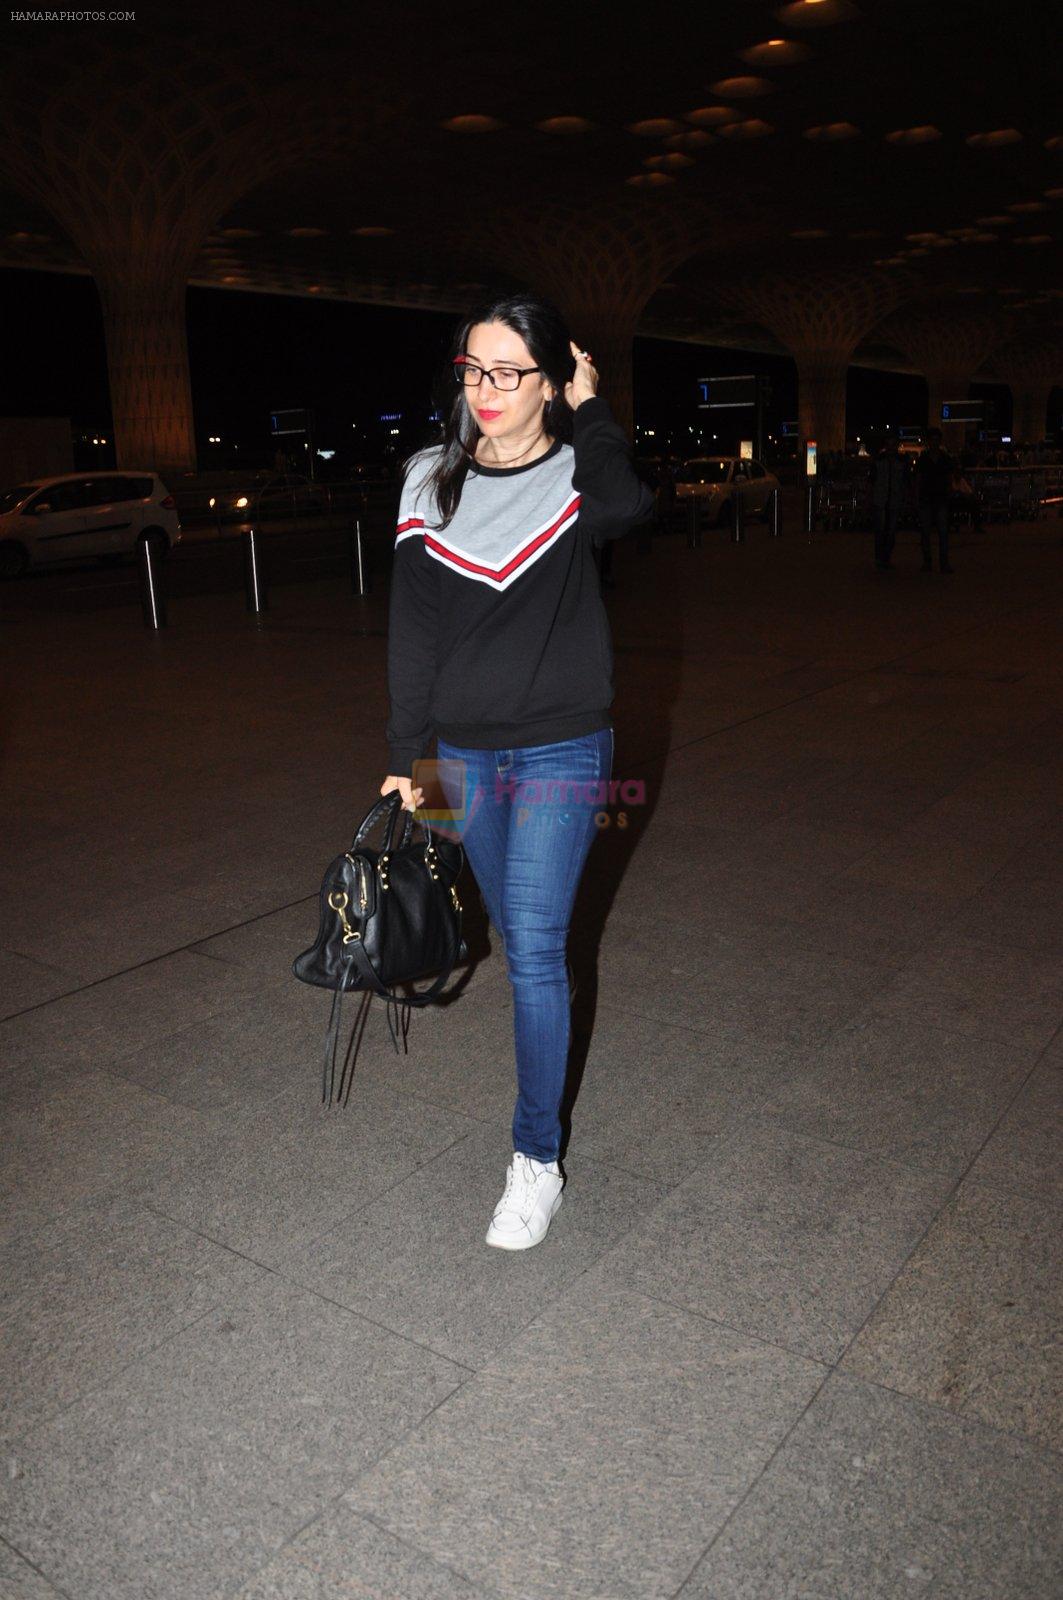 Karisma Kapoor snapped at airport on 4th Aug 2016